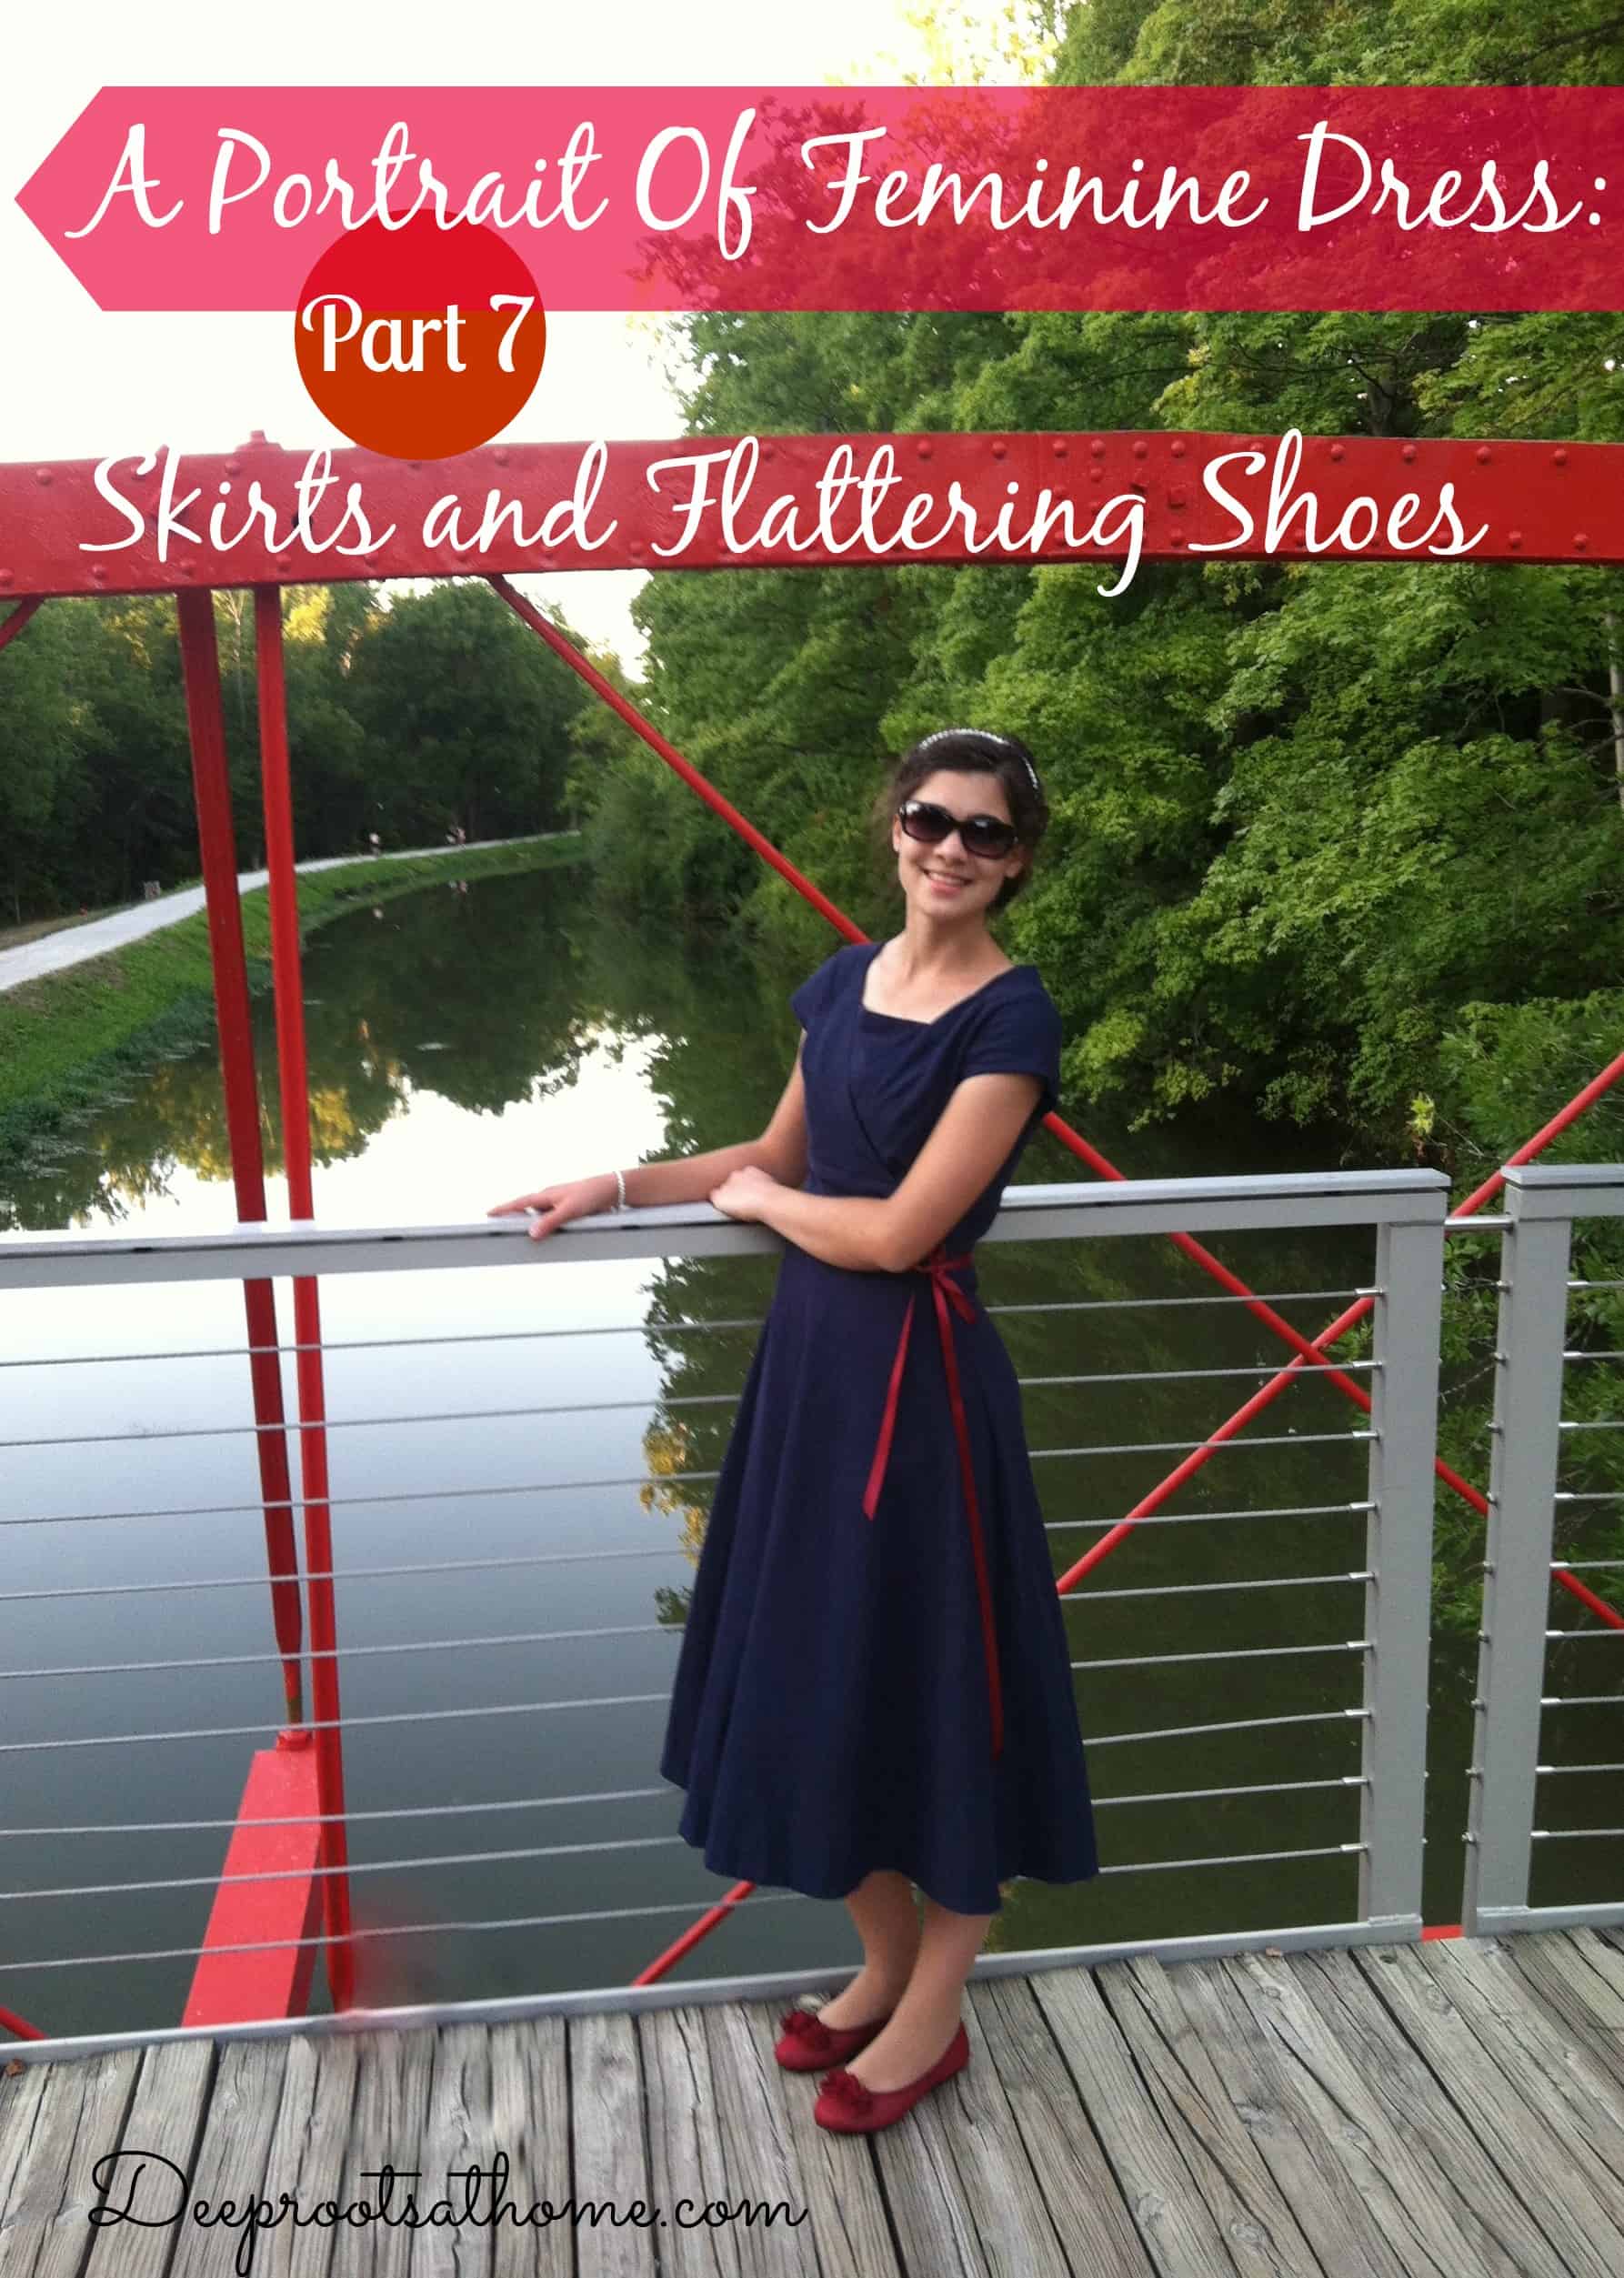 Finding Flattering Shoes & Footwear To Wear With Skirts & Dresses. strappy shoes, feminine, modest, with skirts, tights in the winter, leggings, flattering shoes for skirts